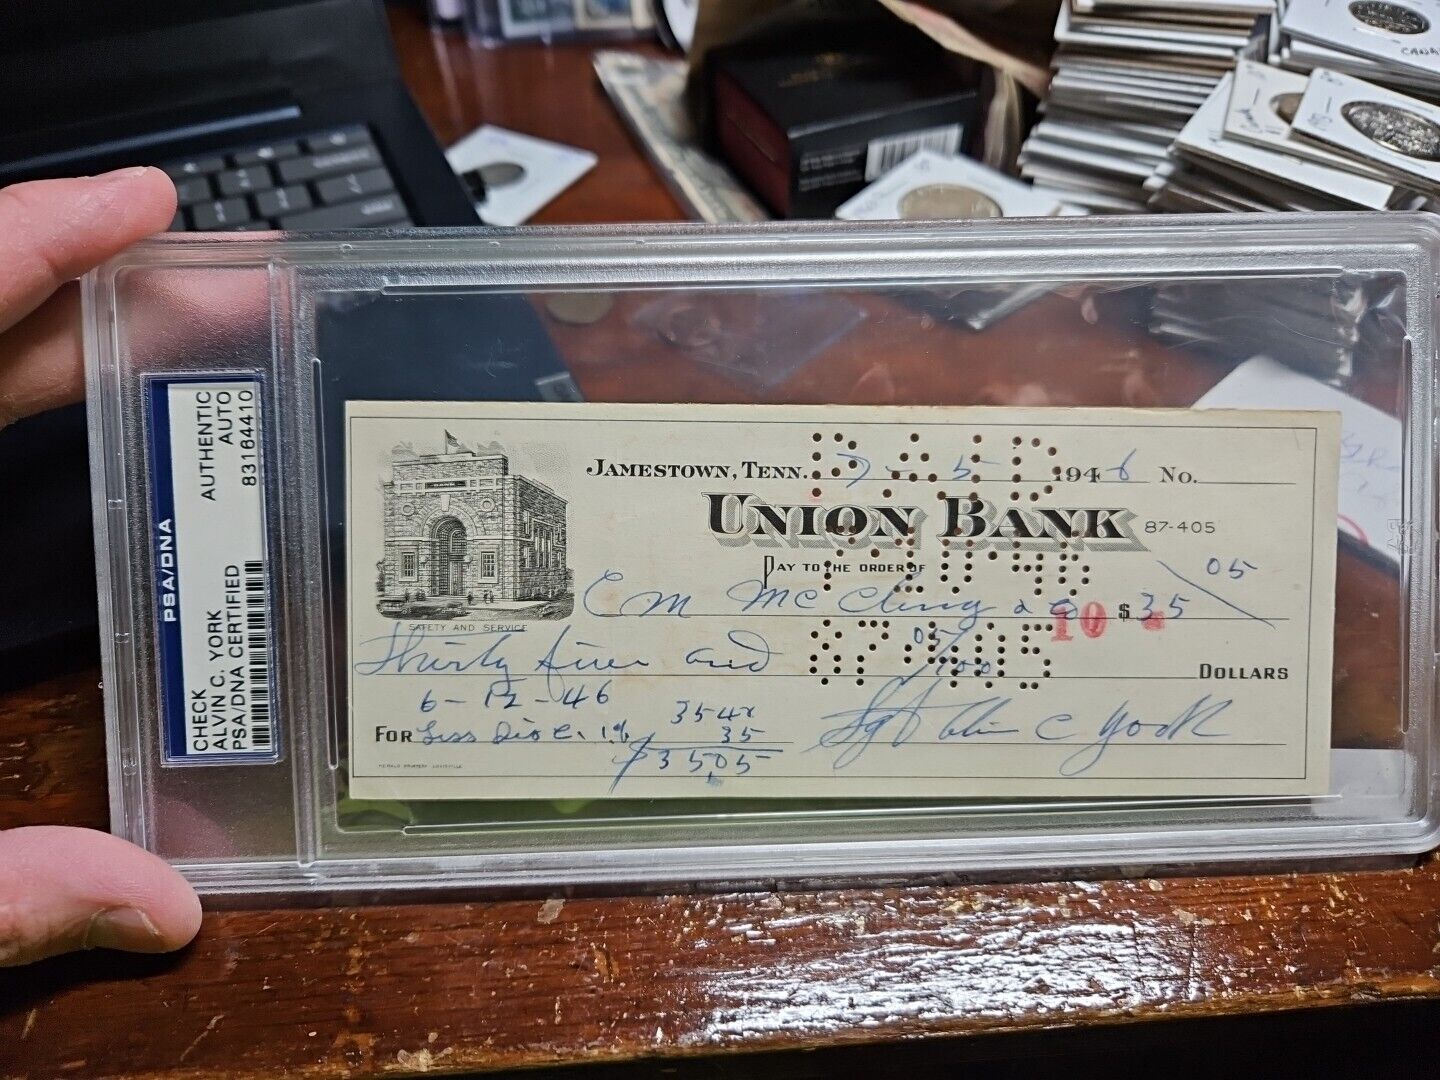 Sgt. Alvin C. York Signed Check, Certificate 